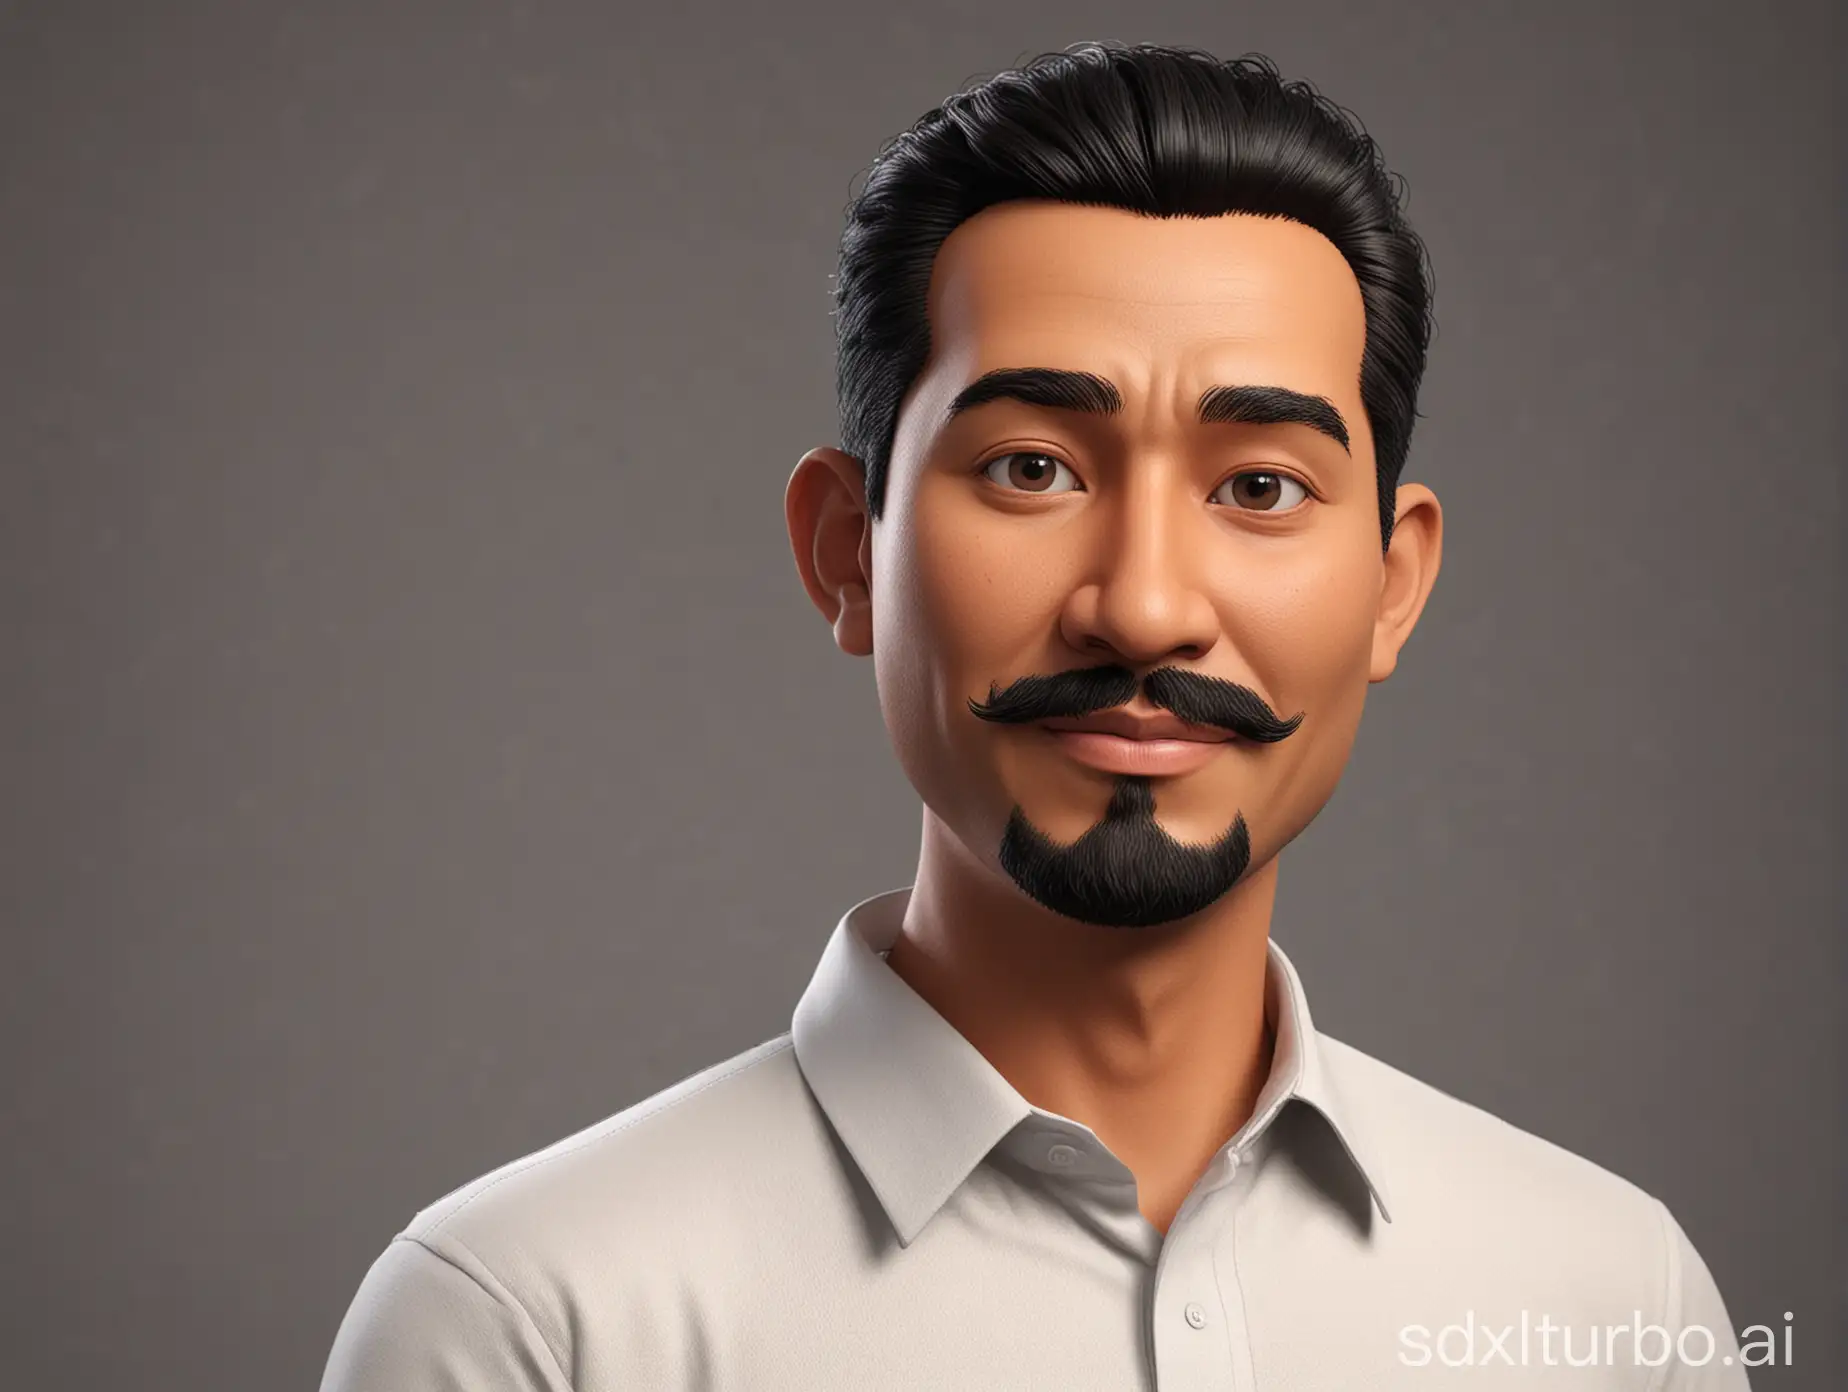 Cartoonstyle-3D-Portrait-of-a-Handsome-50YearOld-Indonesian-Man-in-White-Shirt